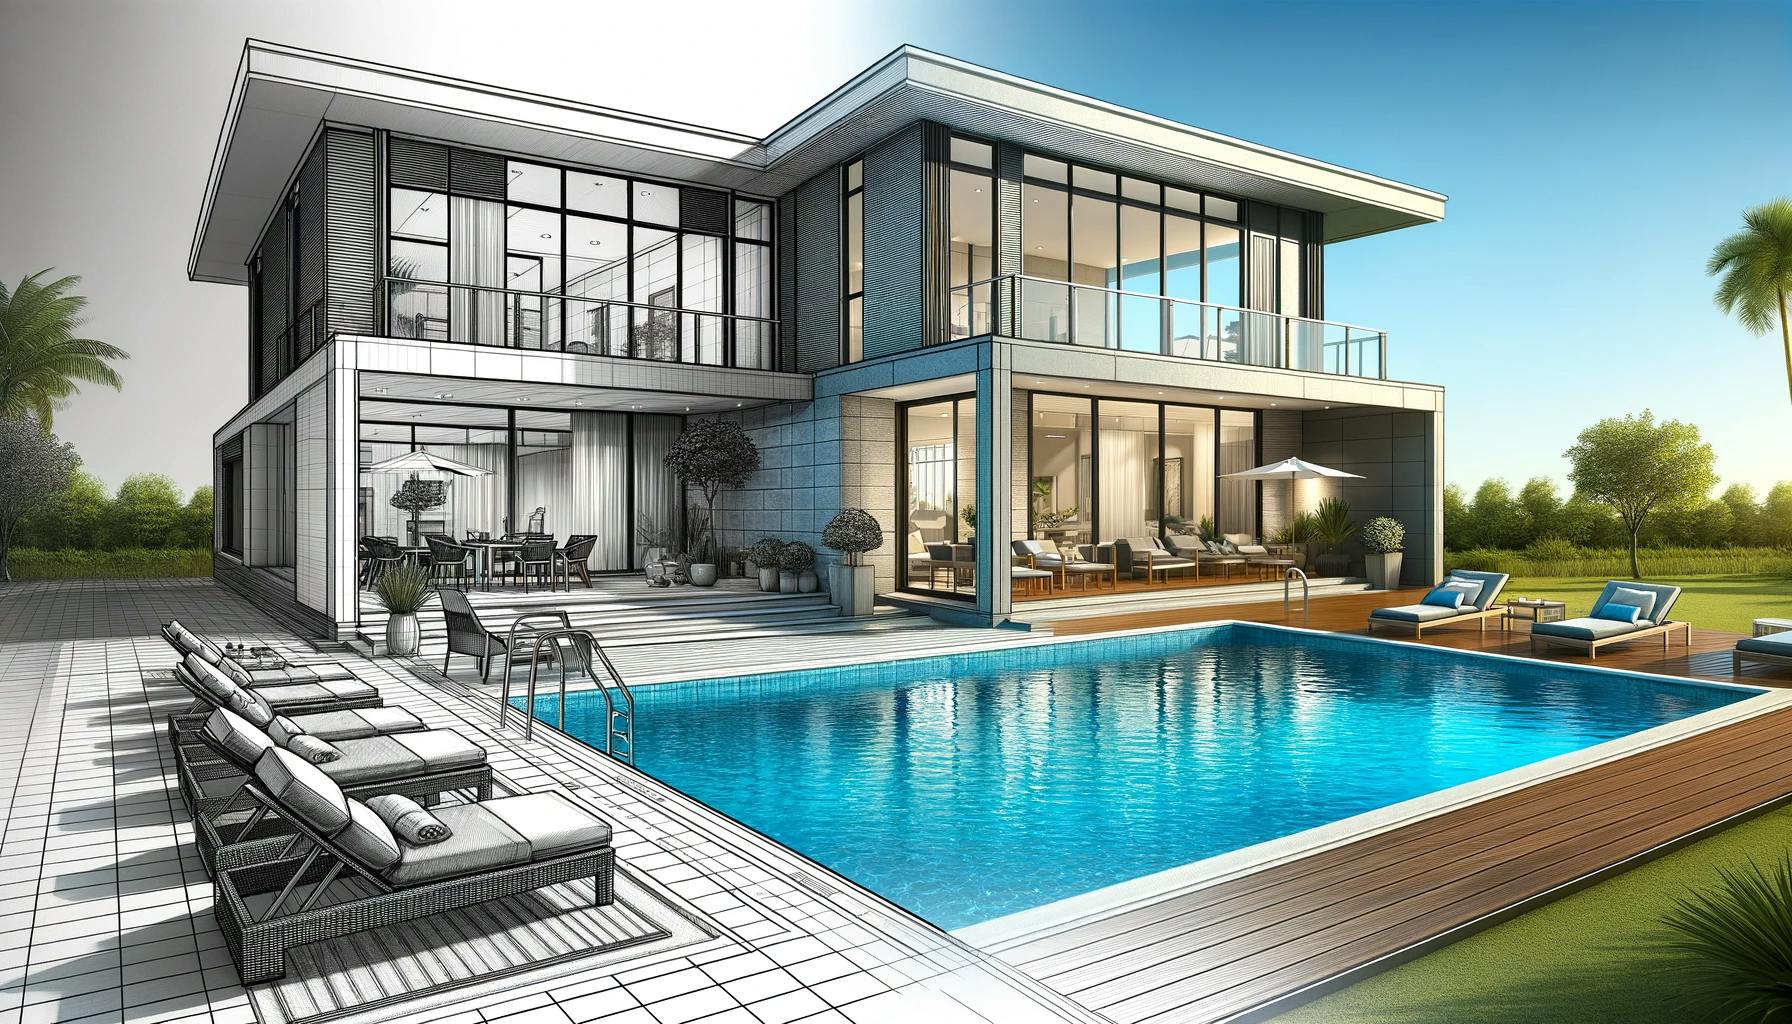 A modern luxurious home with a big swimming pool where half the picture looks like a sketch and the other half is normal